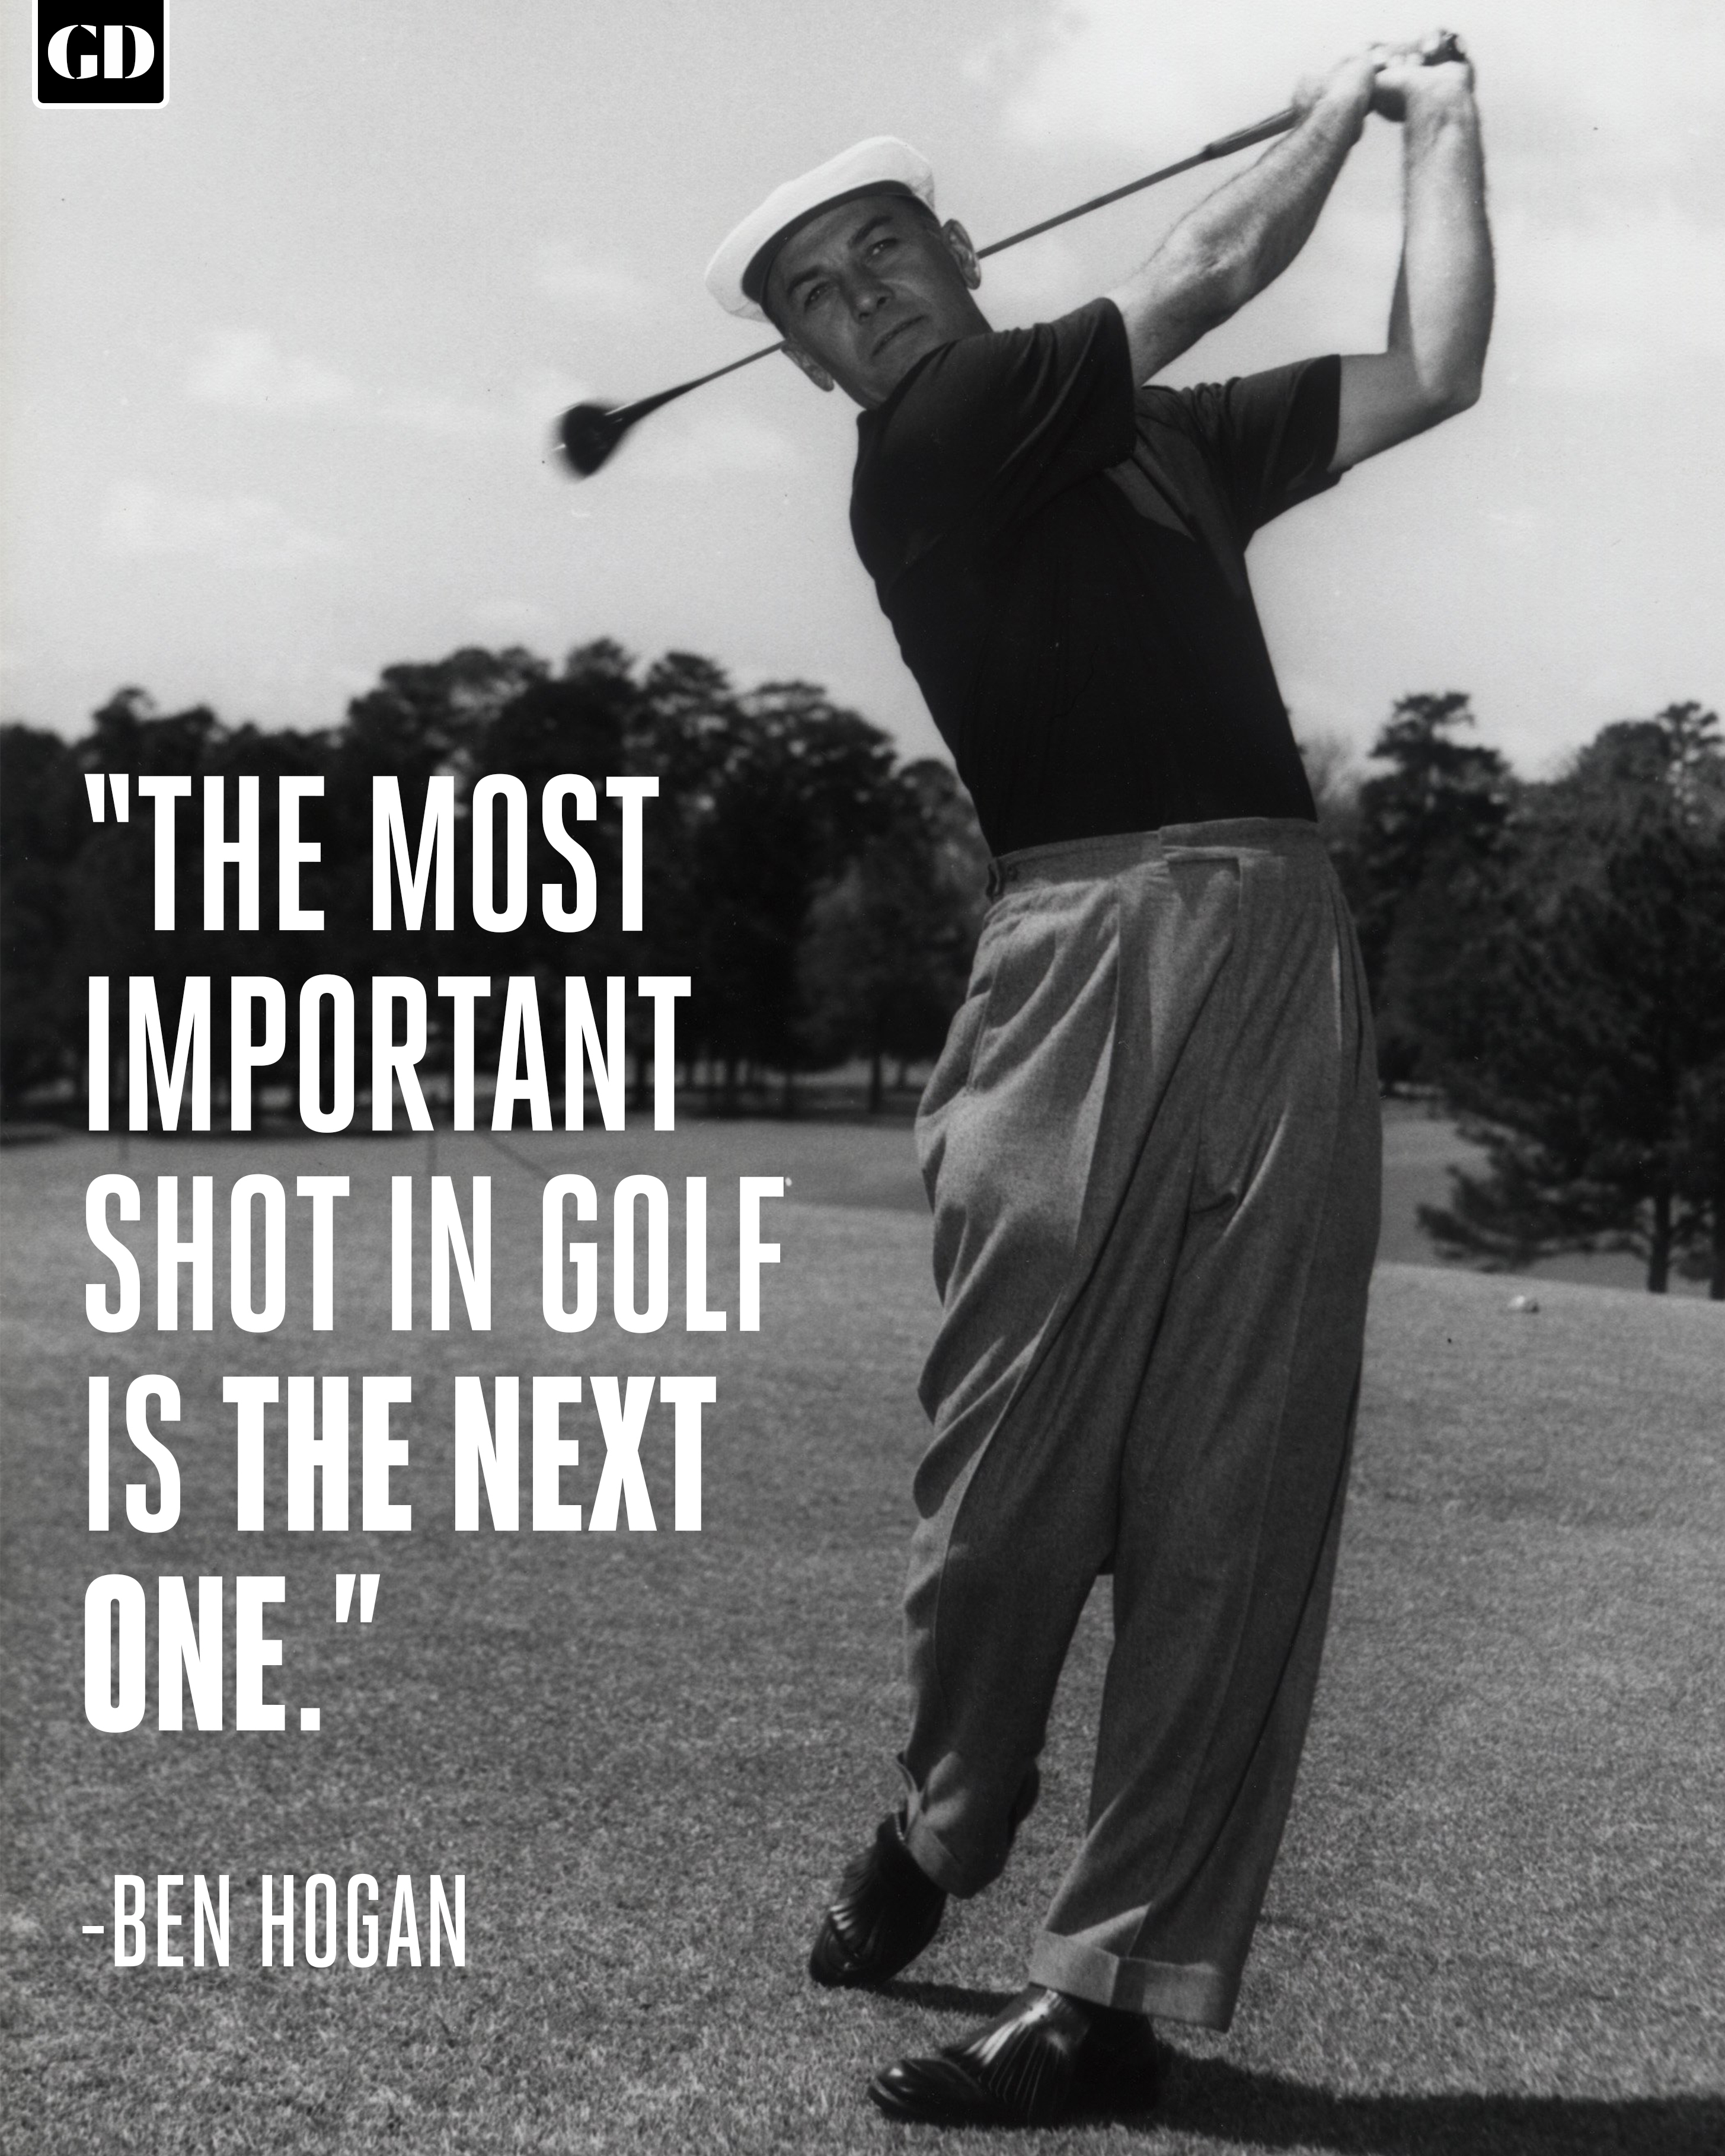 IV. Wisdom and Life Lessons from Golf Legends